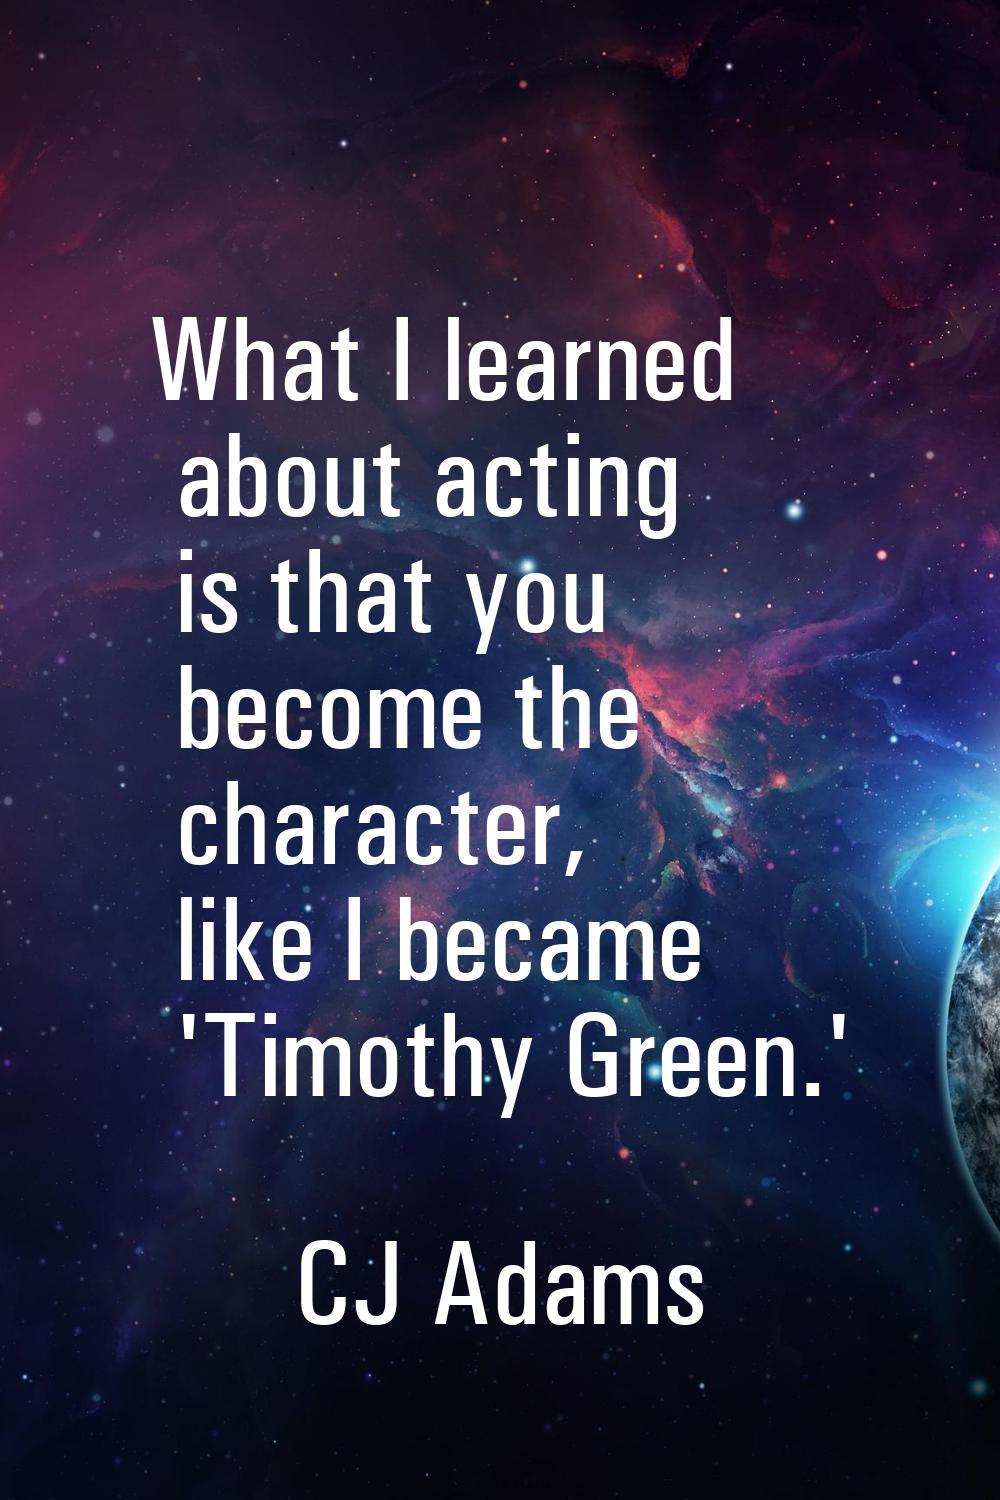 What I learned about acting is that you become the character, like I became 'Timothy Green.'